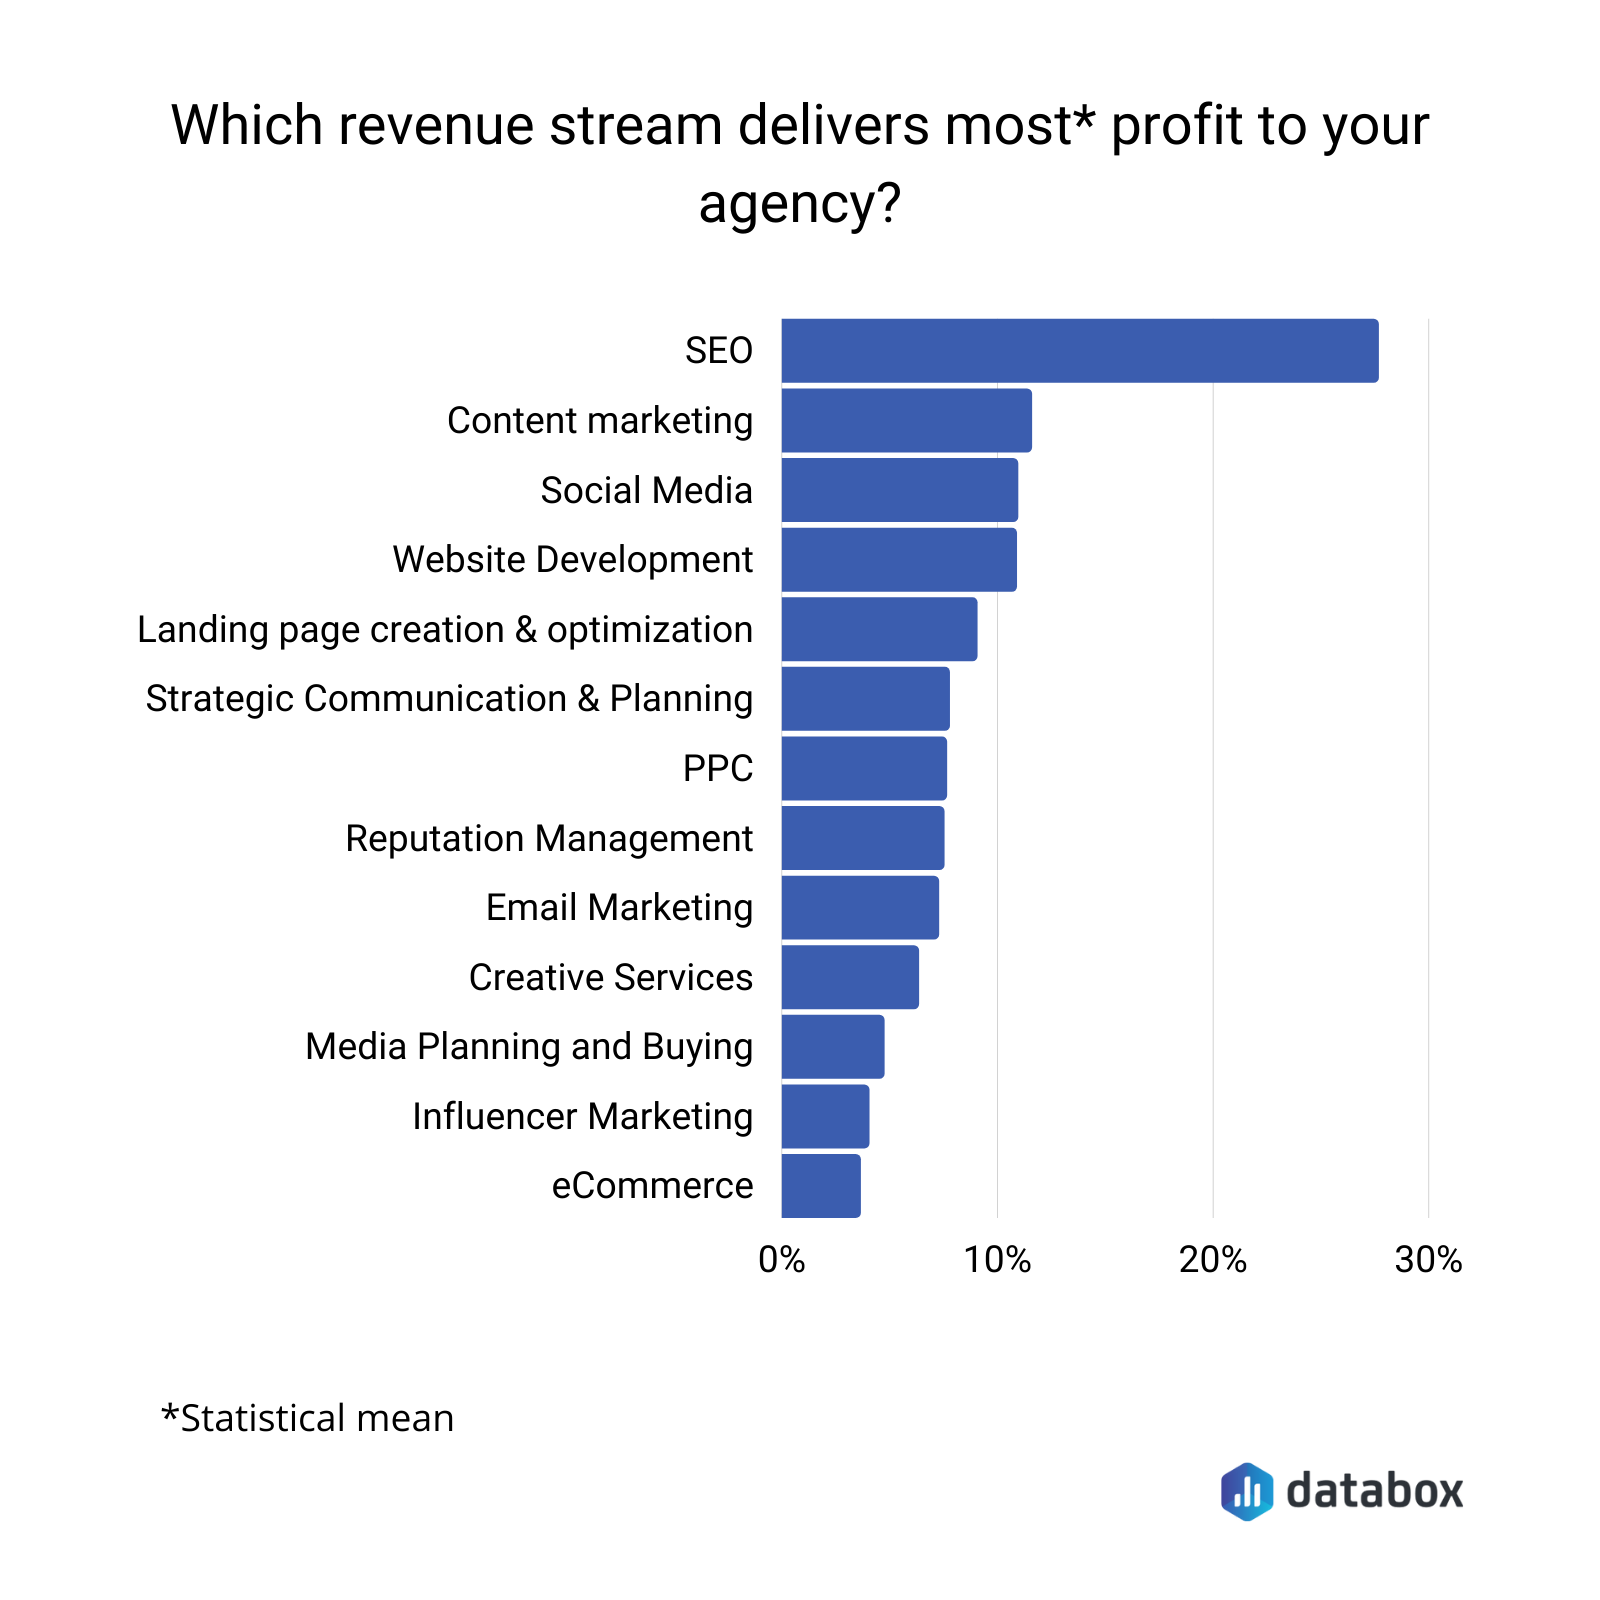 Which revenue stream delivers most profit to your agency